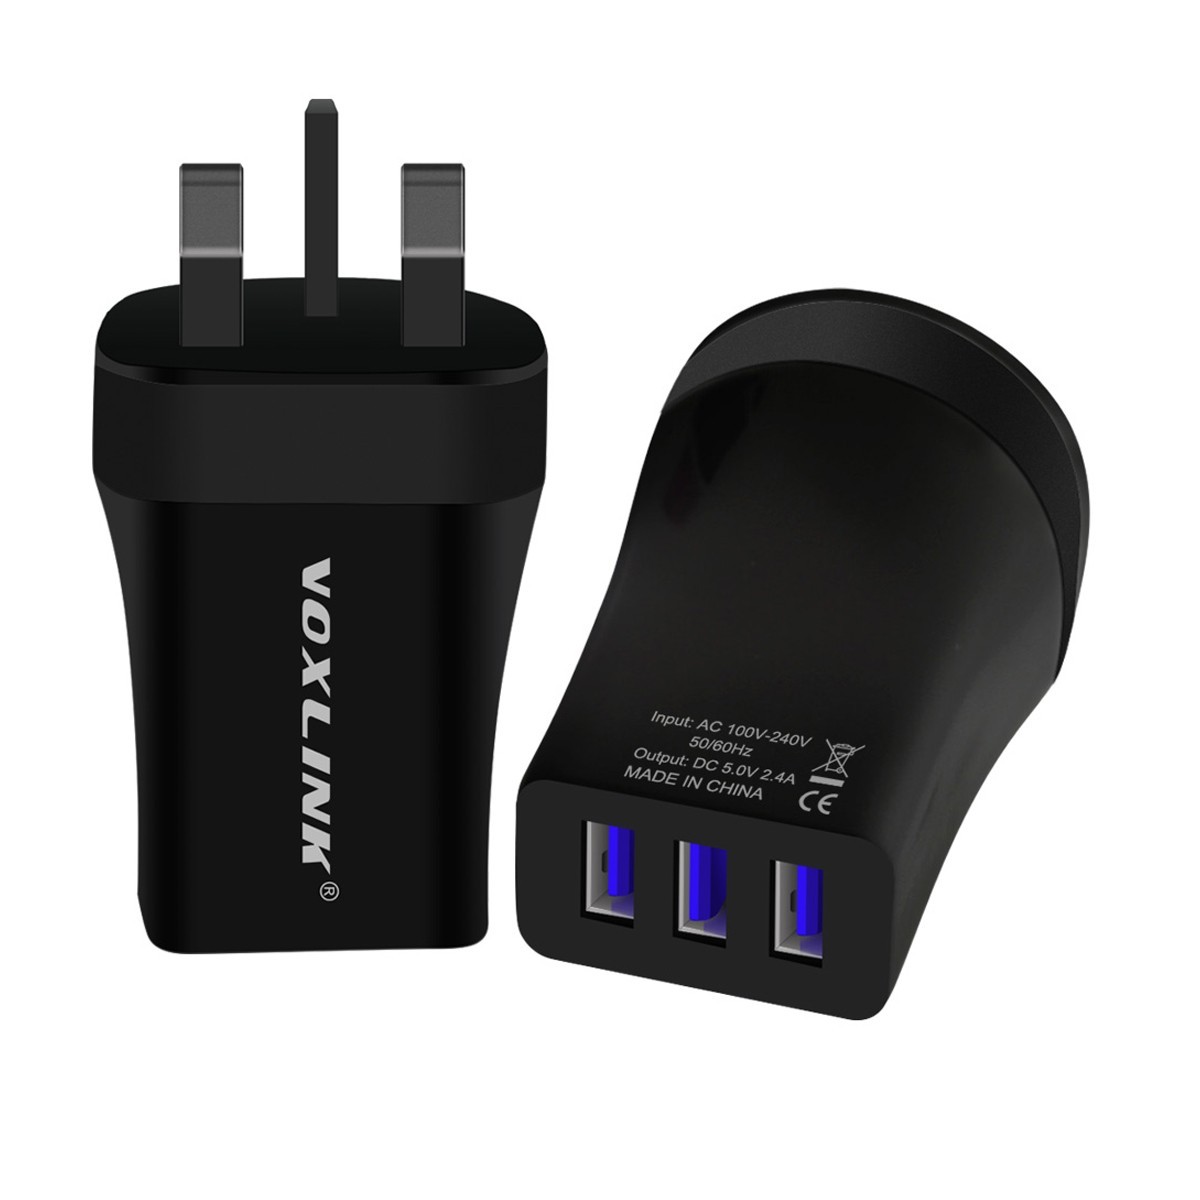 VOXLINK Fast Charging Adapter 5V 3.4A 3Port USB Home Travel Wall Charger EU/UK Plug For iPhone 7 6s plus Samsung S7 Xiaomi &More black UK